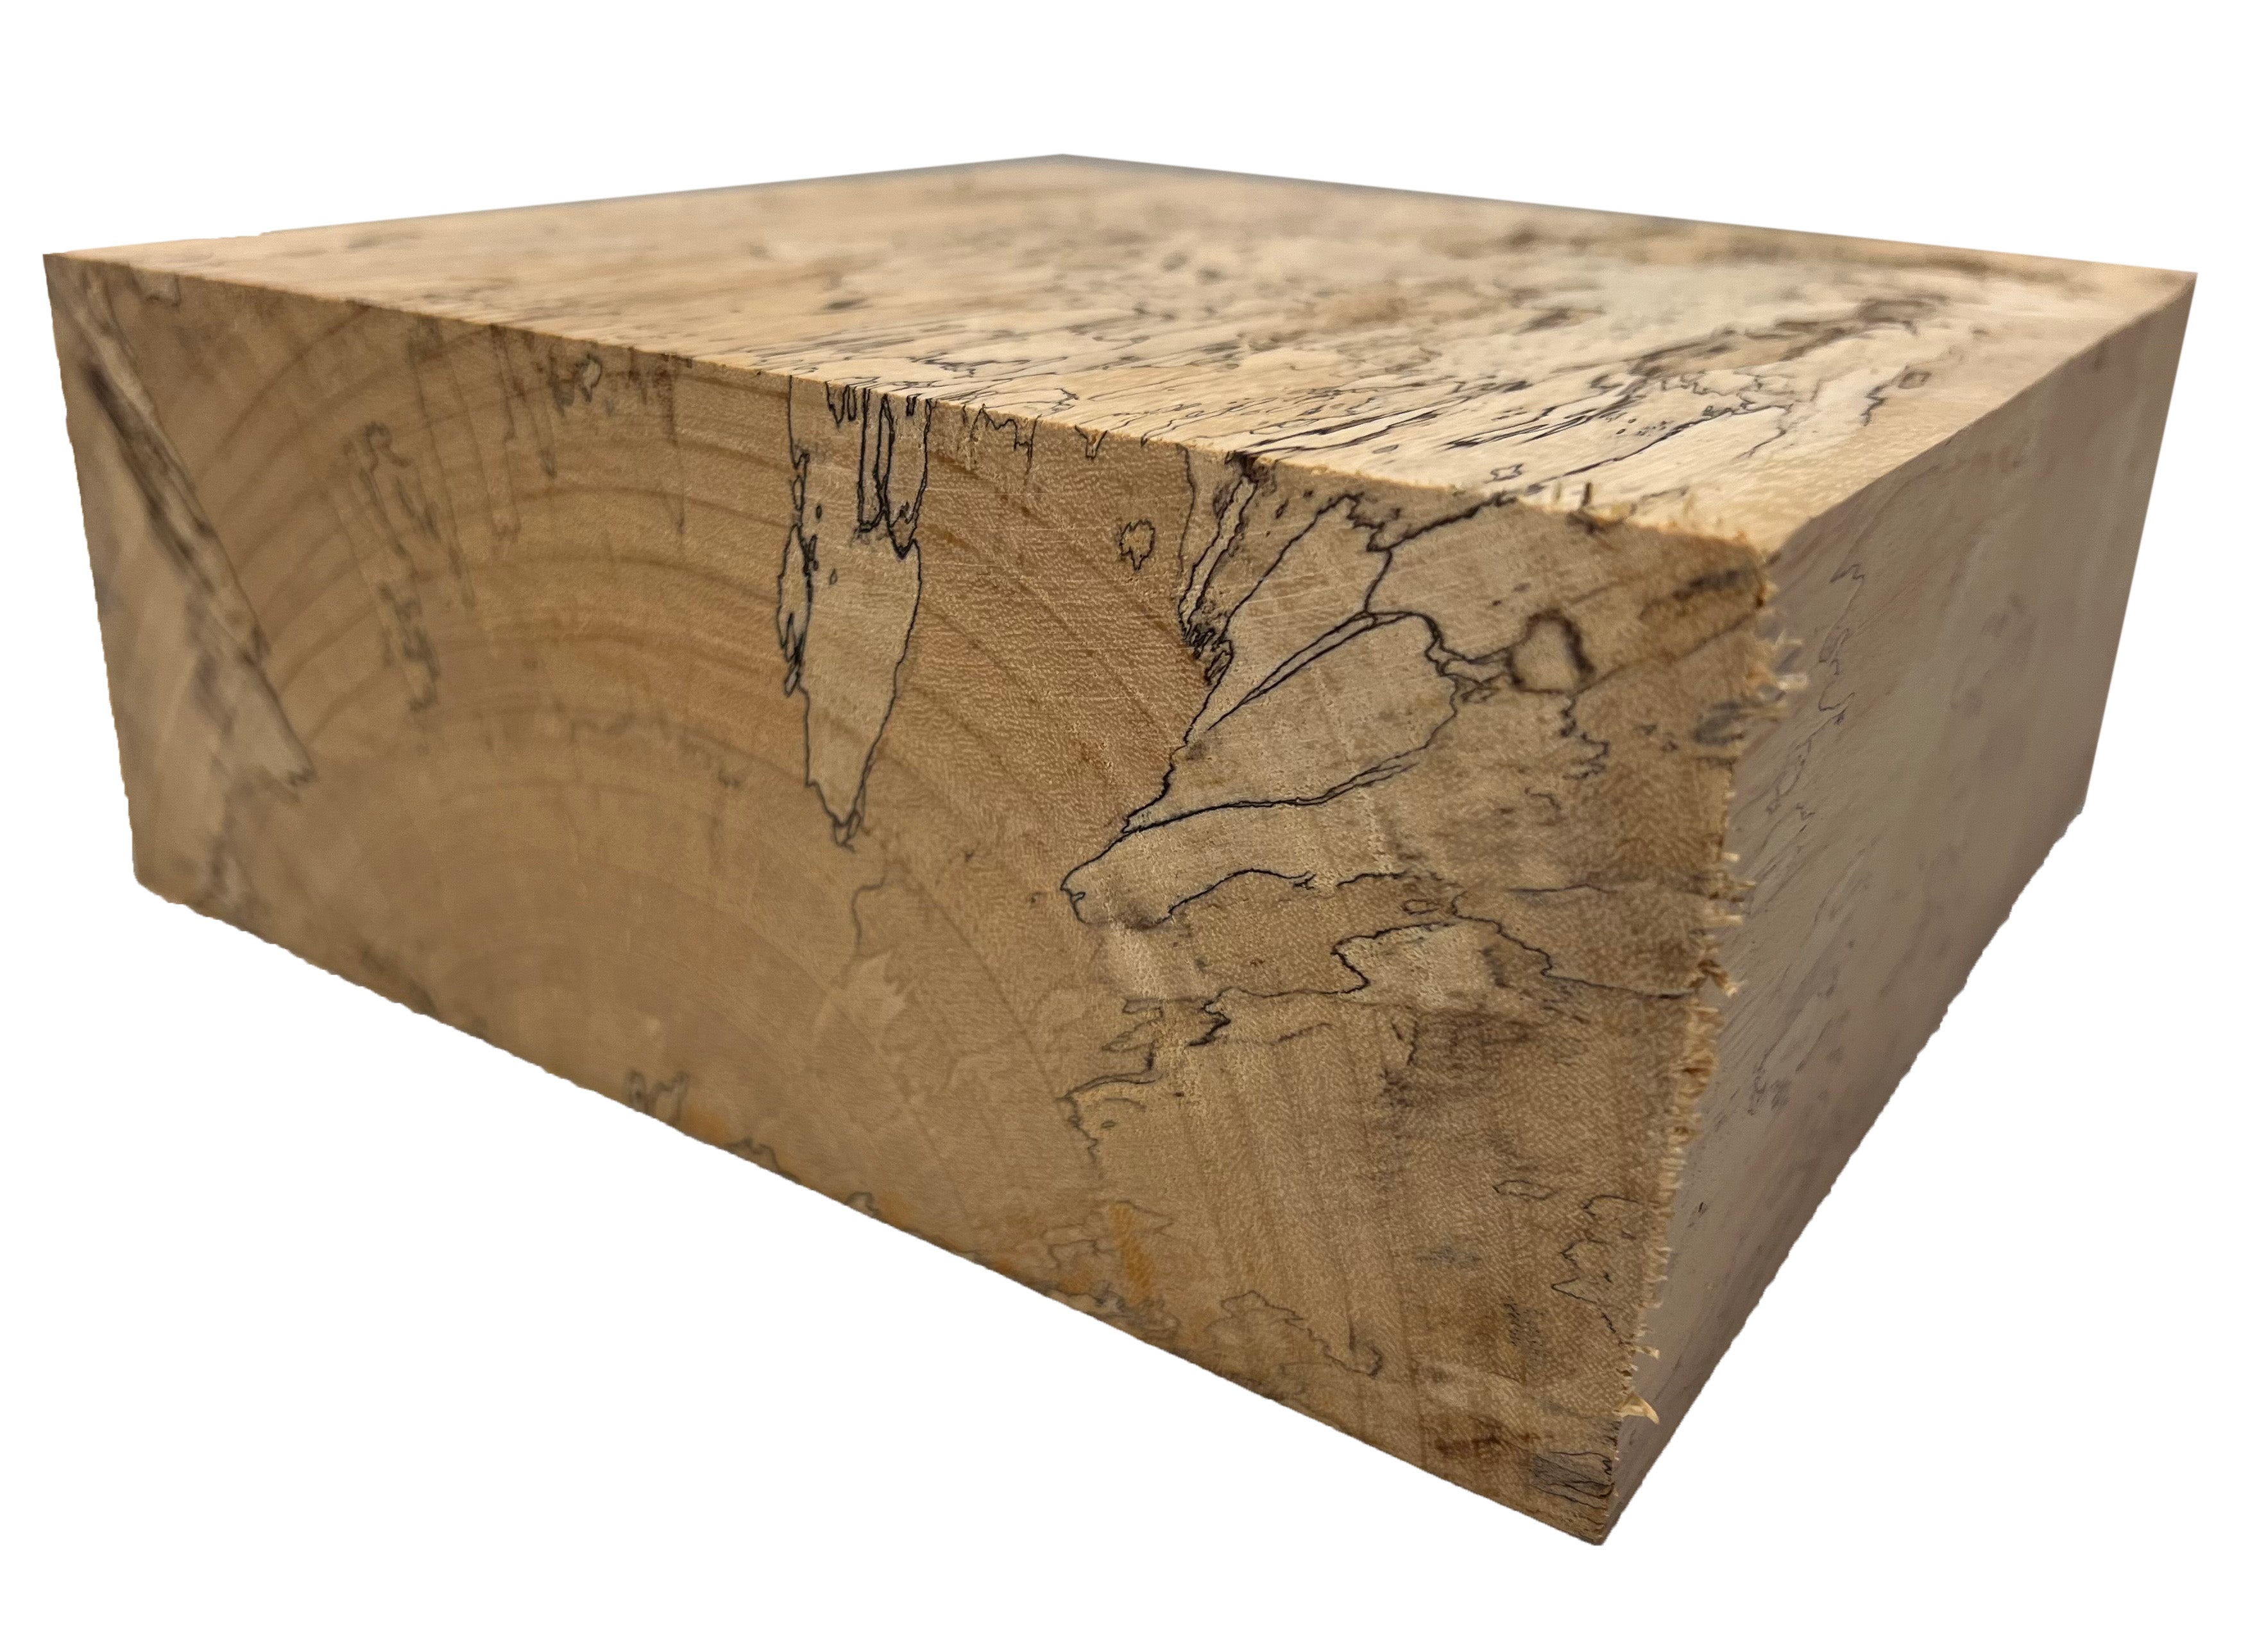 Pack of 10, Spalted Tamarind Wood Bowl Blanks 4&quot; x 4&quot; x 2&quot; - Exotic Wood Zone - Buy online Across USA 